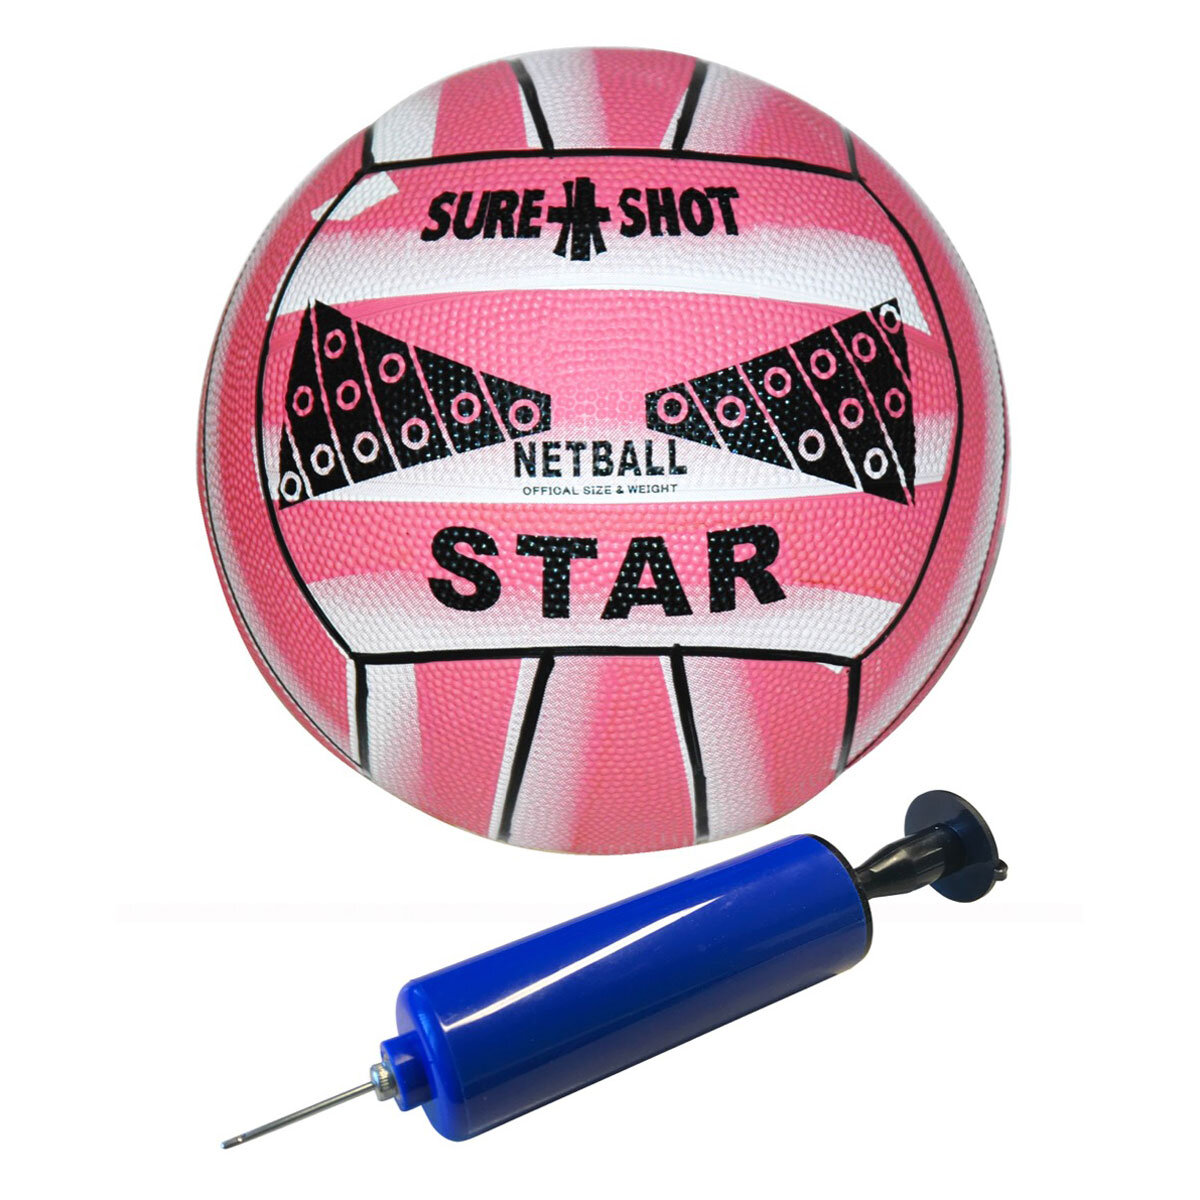 Sure Shot 9ft (2.7 m) Prime Shot Junior Netball Goal in Pink/Grey with Padding (5-12 Years)